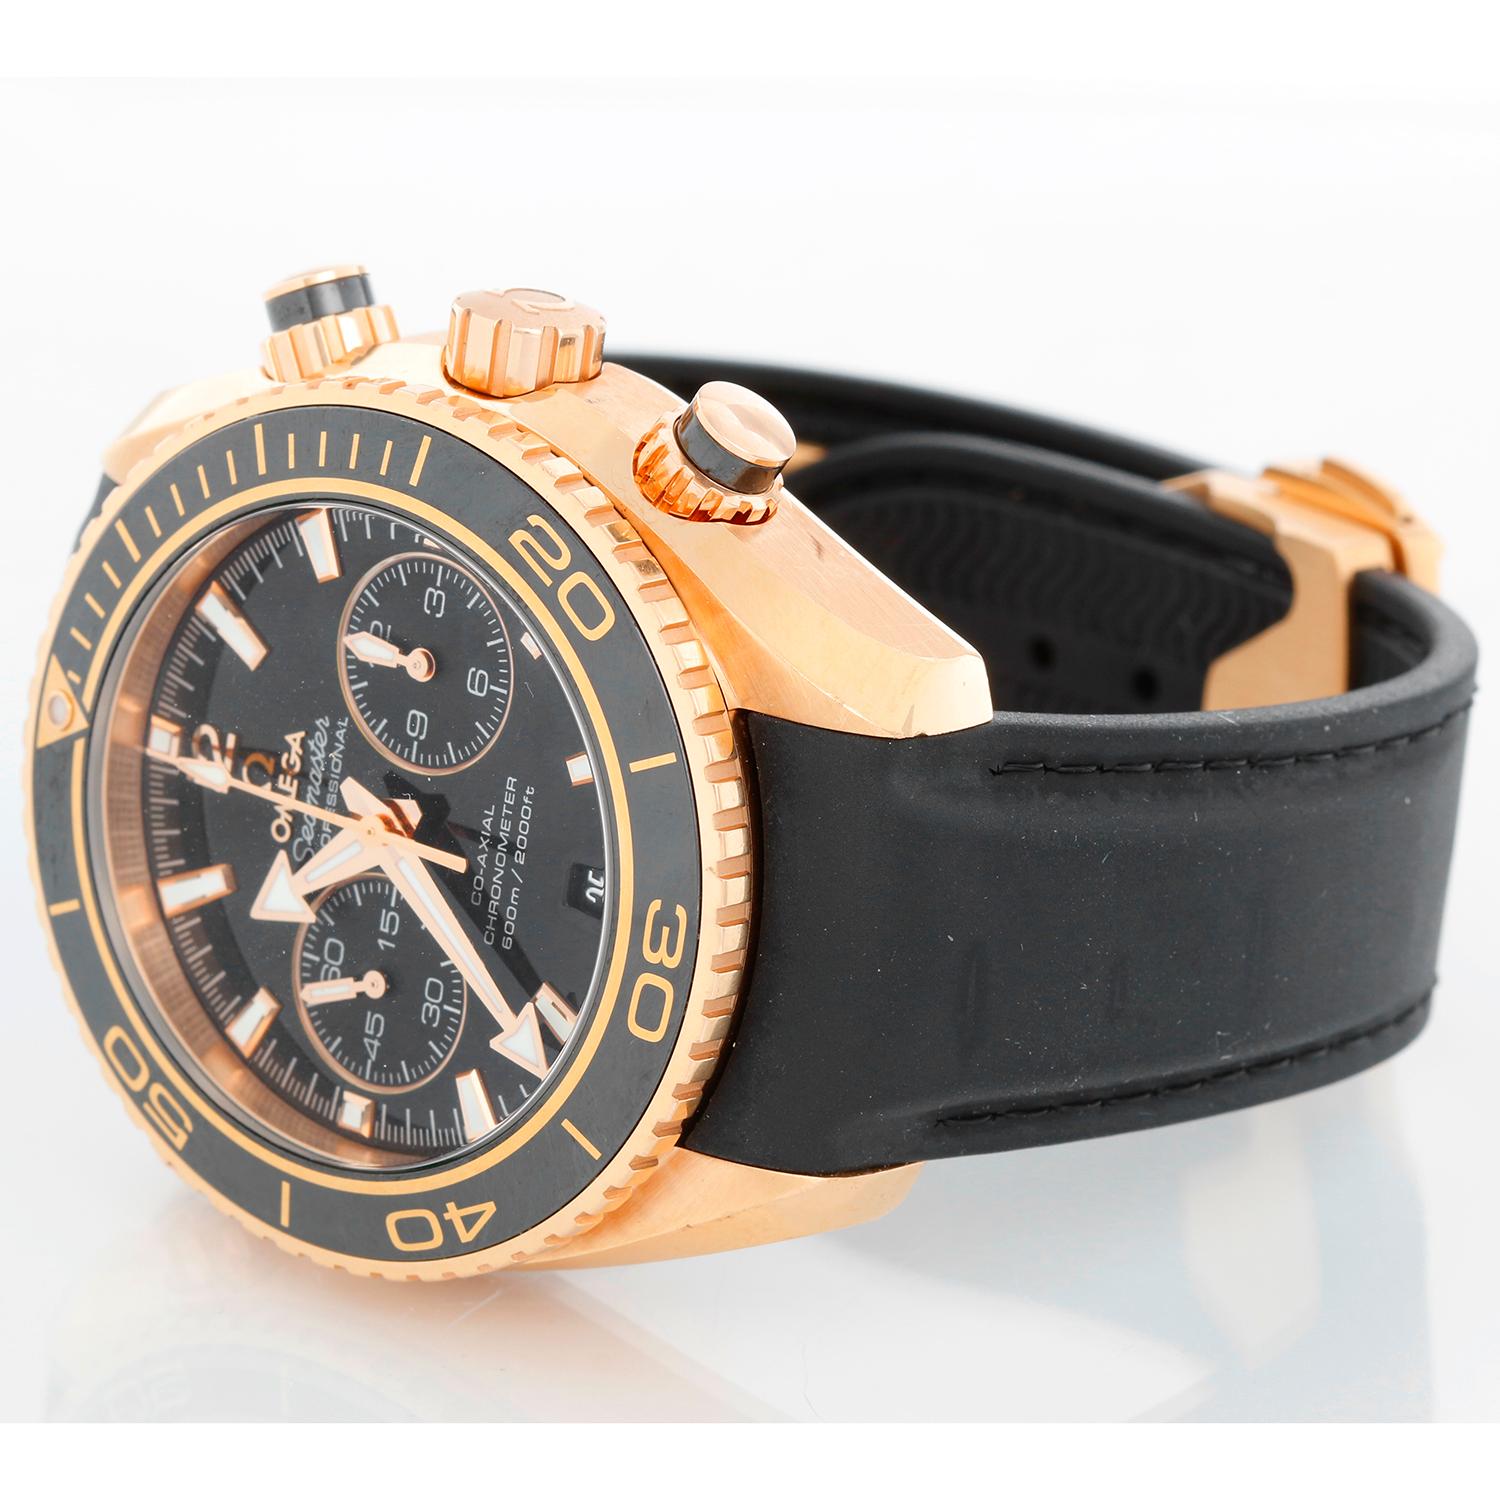 Omega Seamaster Planet Ocean Chronograph Mens Watch 232.63.46.51.01.001 - Self Winding Automatic Chronometer Co-Axial Movement. Rose gold with unidirectional rotating bezel ( 45.5 mm ). Black dial with black subdials; date at 6 o'clock. Black rubber